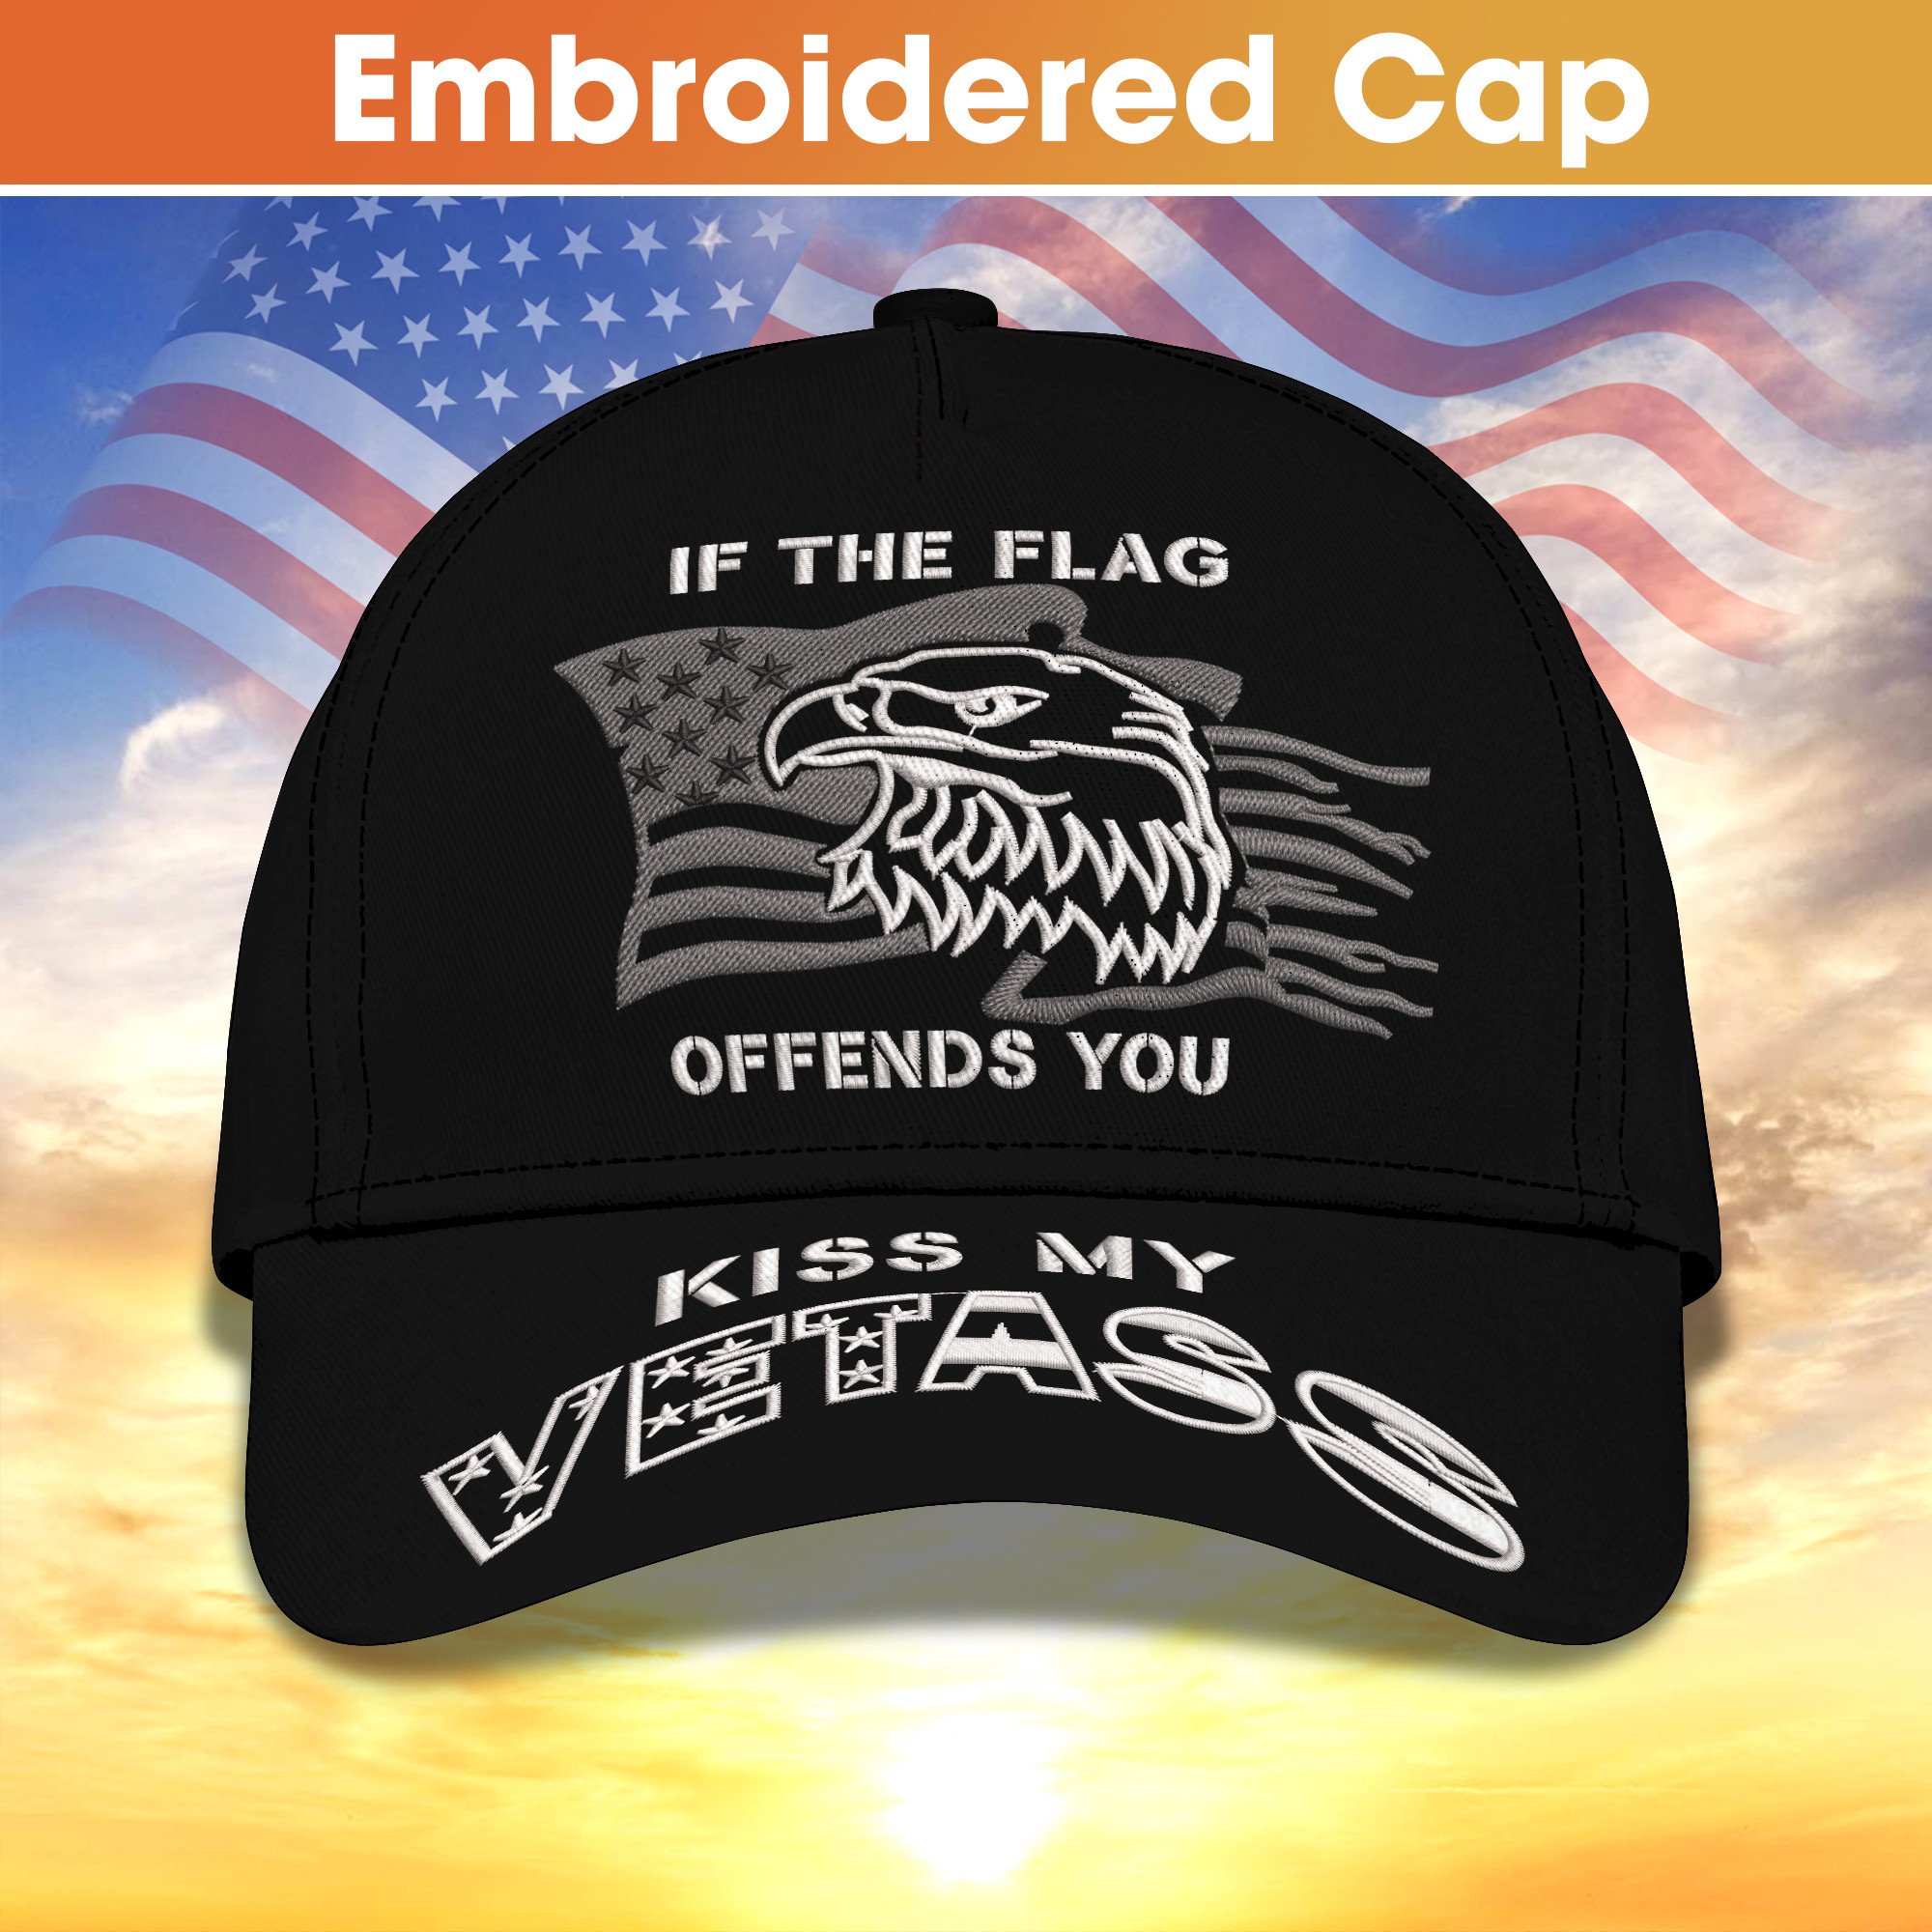 Personalized Embroidery Cap - If The Flag Offends You Kiss My Vetass 2778 Hatbor